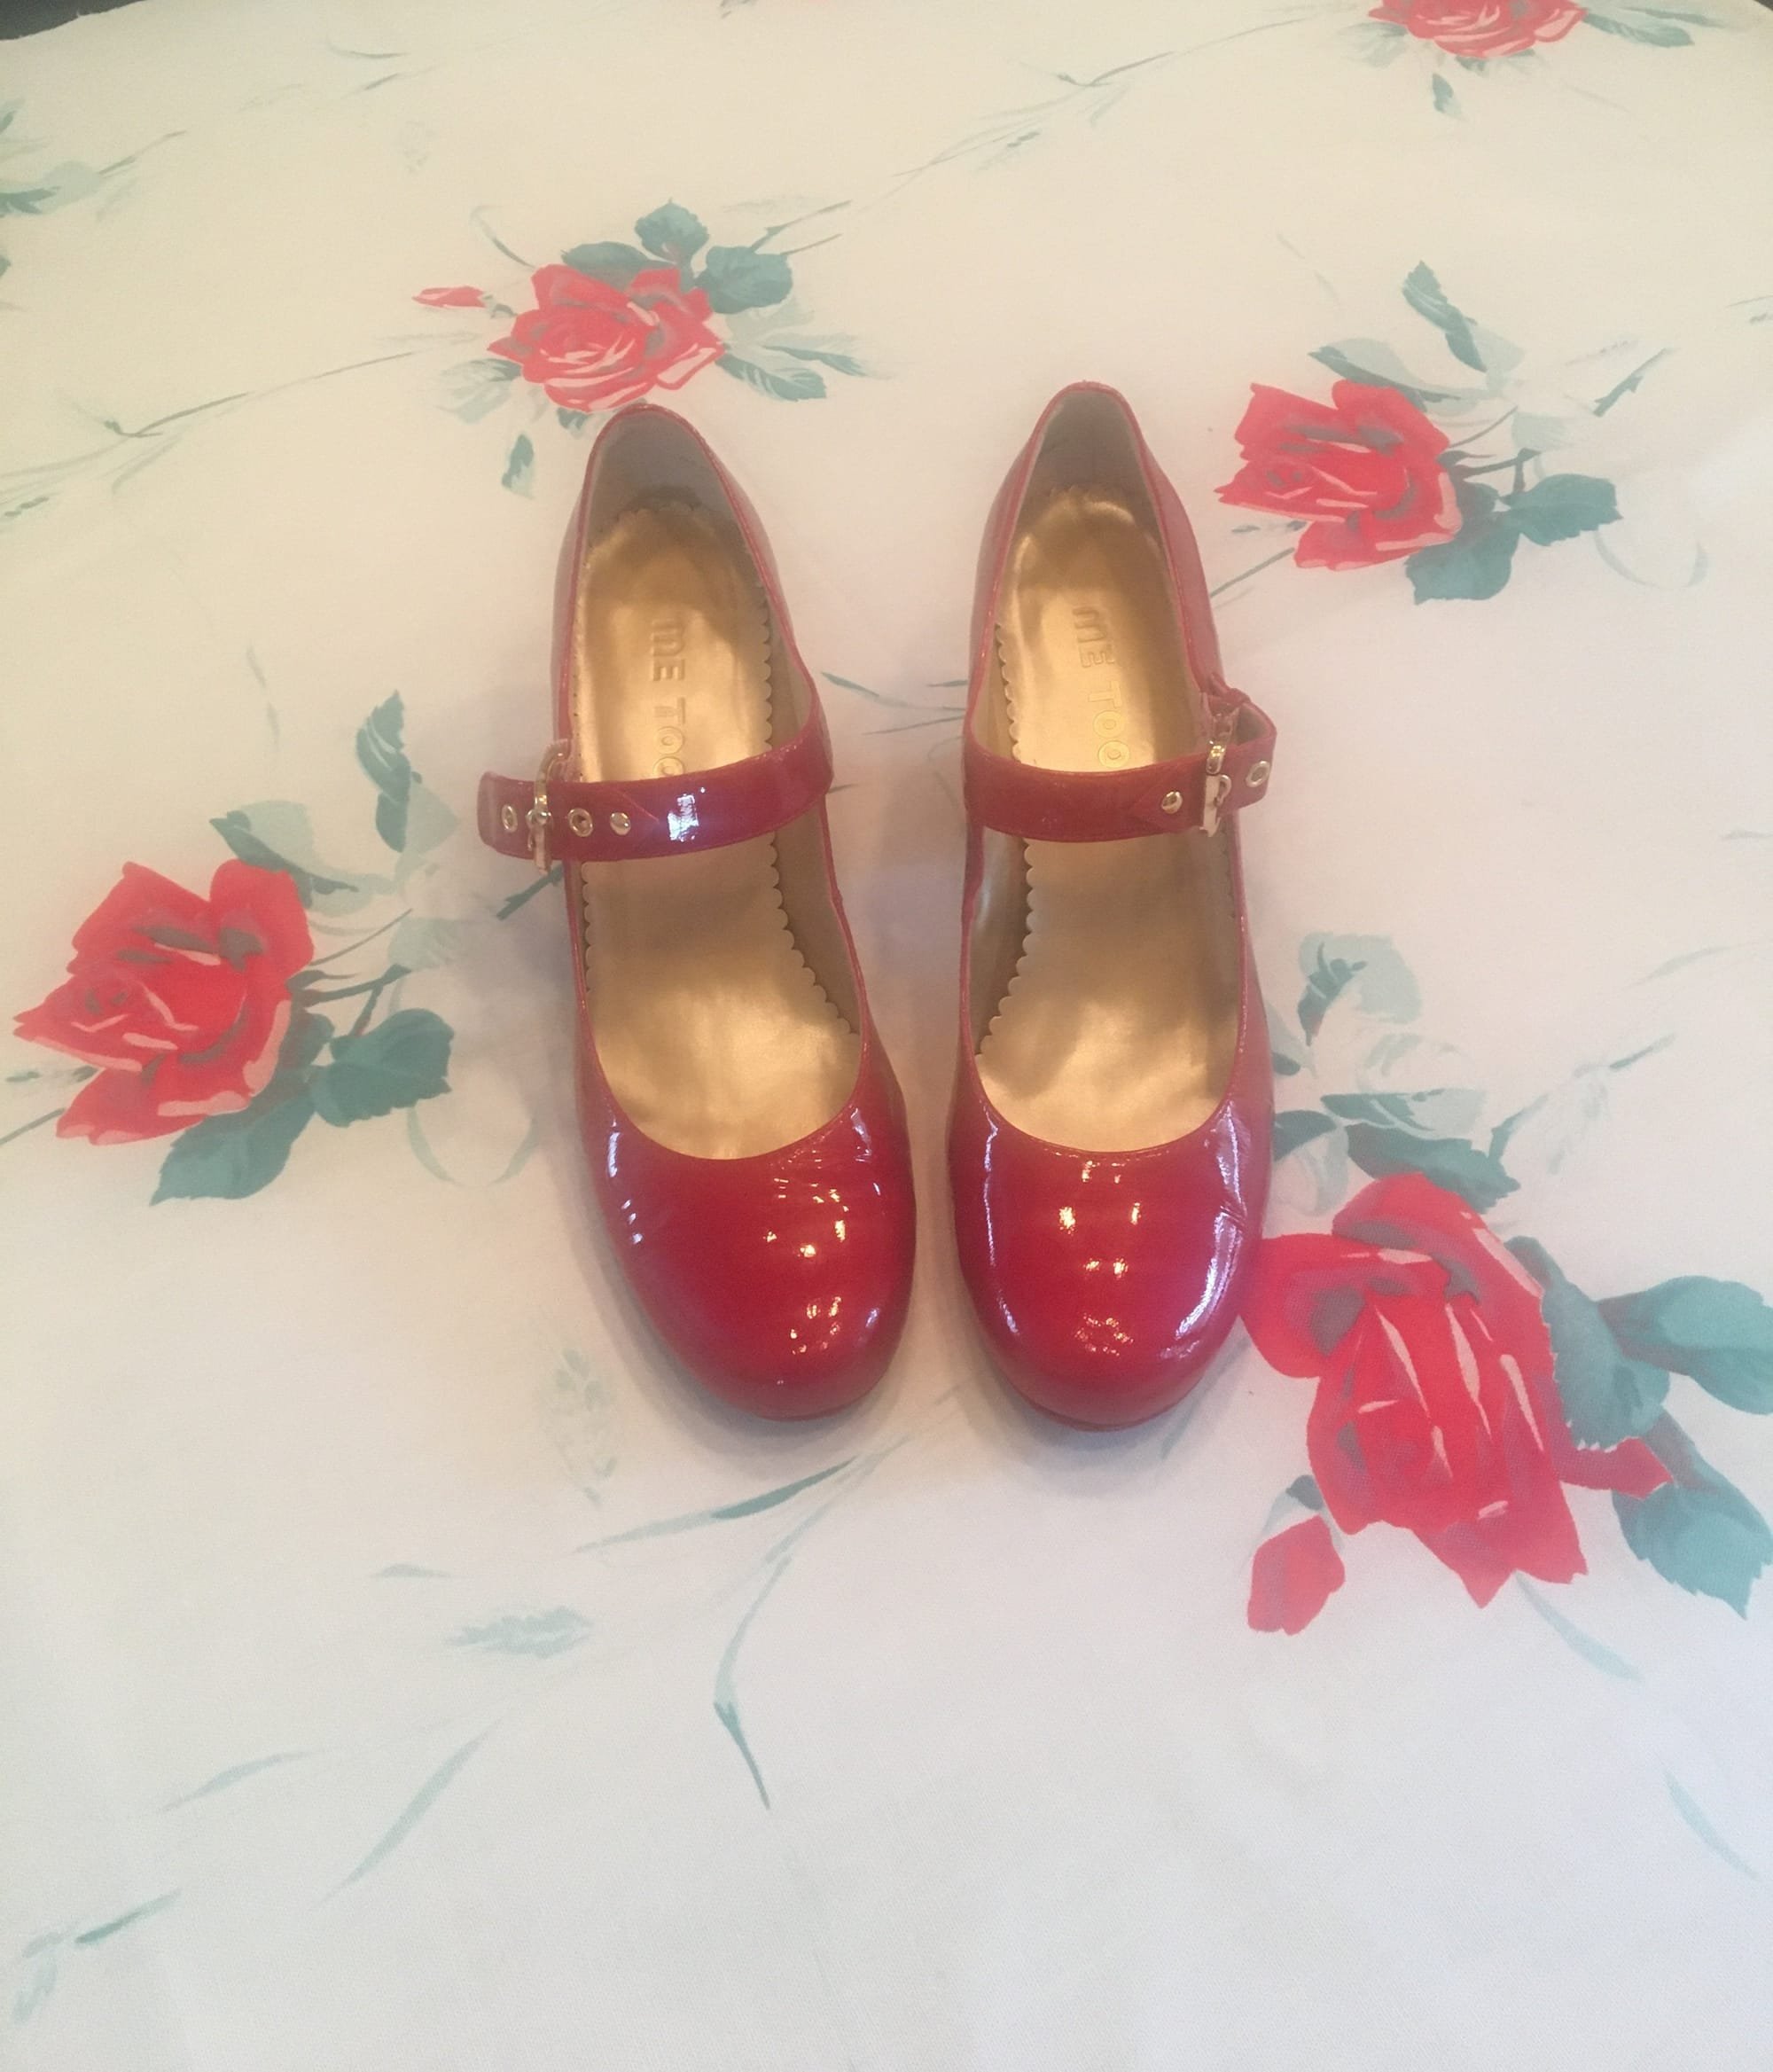 Finding Your Red Dancing Shoes to Reclaim the Inner Wild Woman!